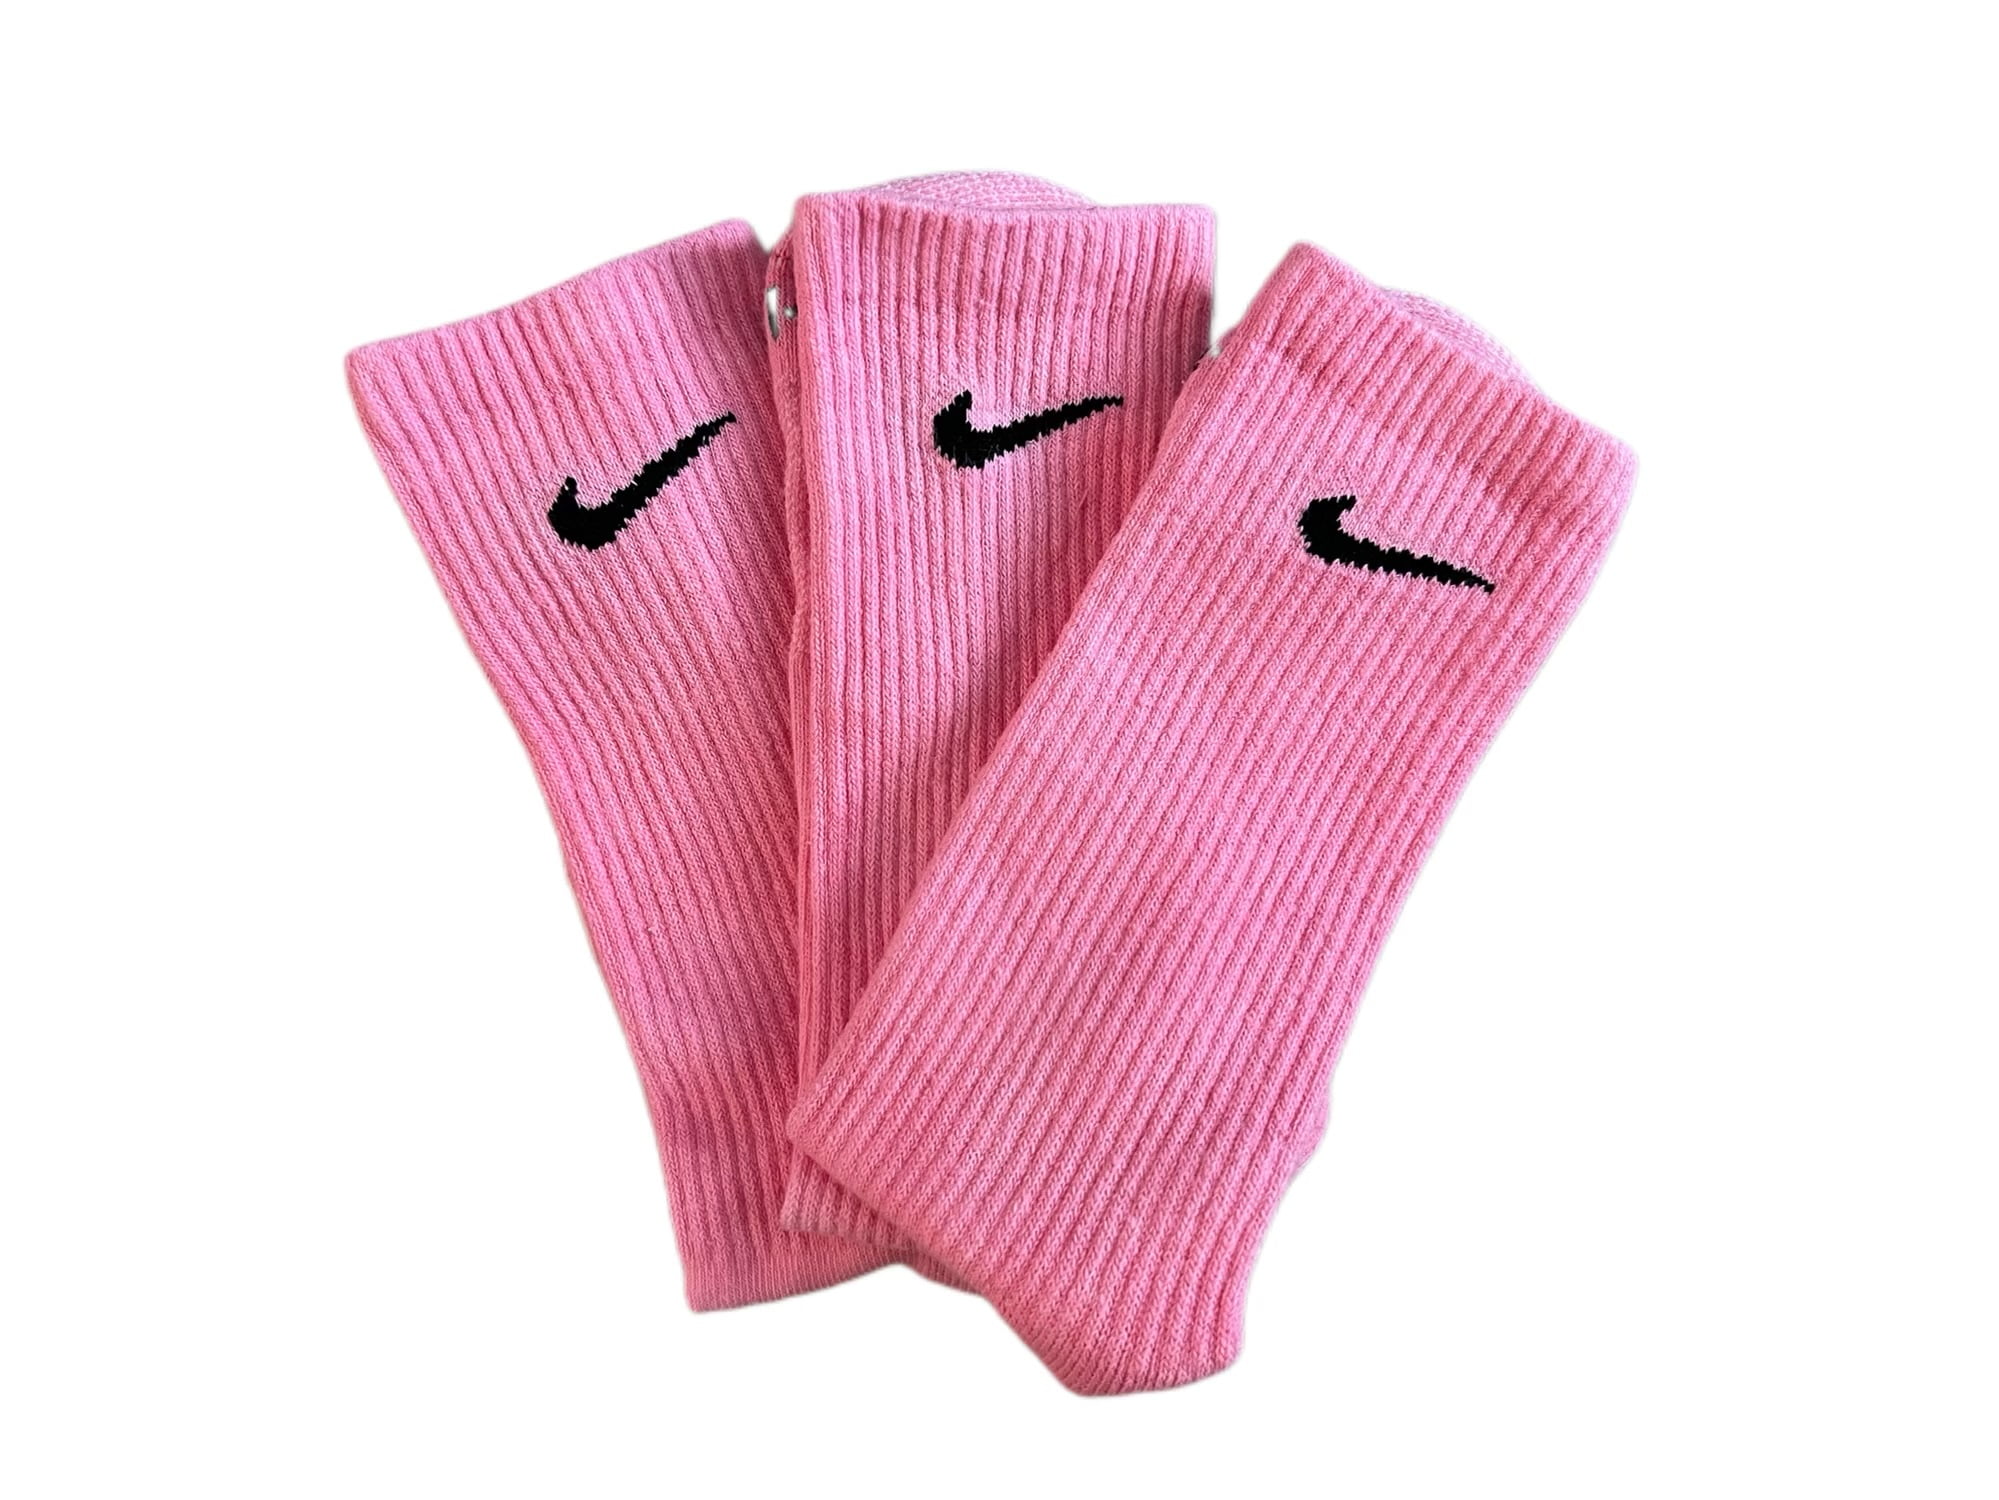 Pack Nike Fit, Socks - Dri Punch 3 Large, Pink Pack Crew Unisex Adult